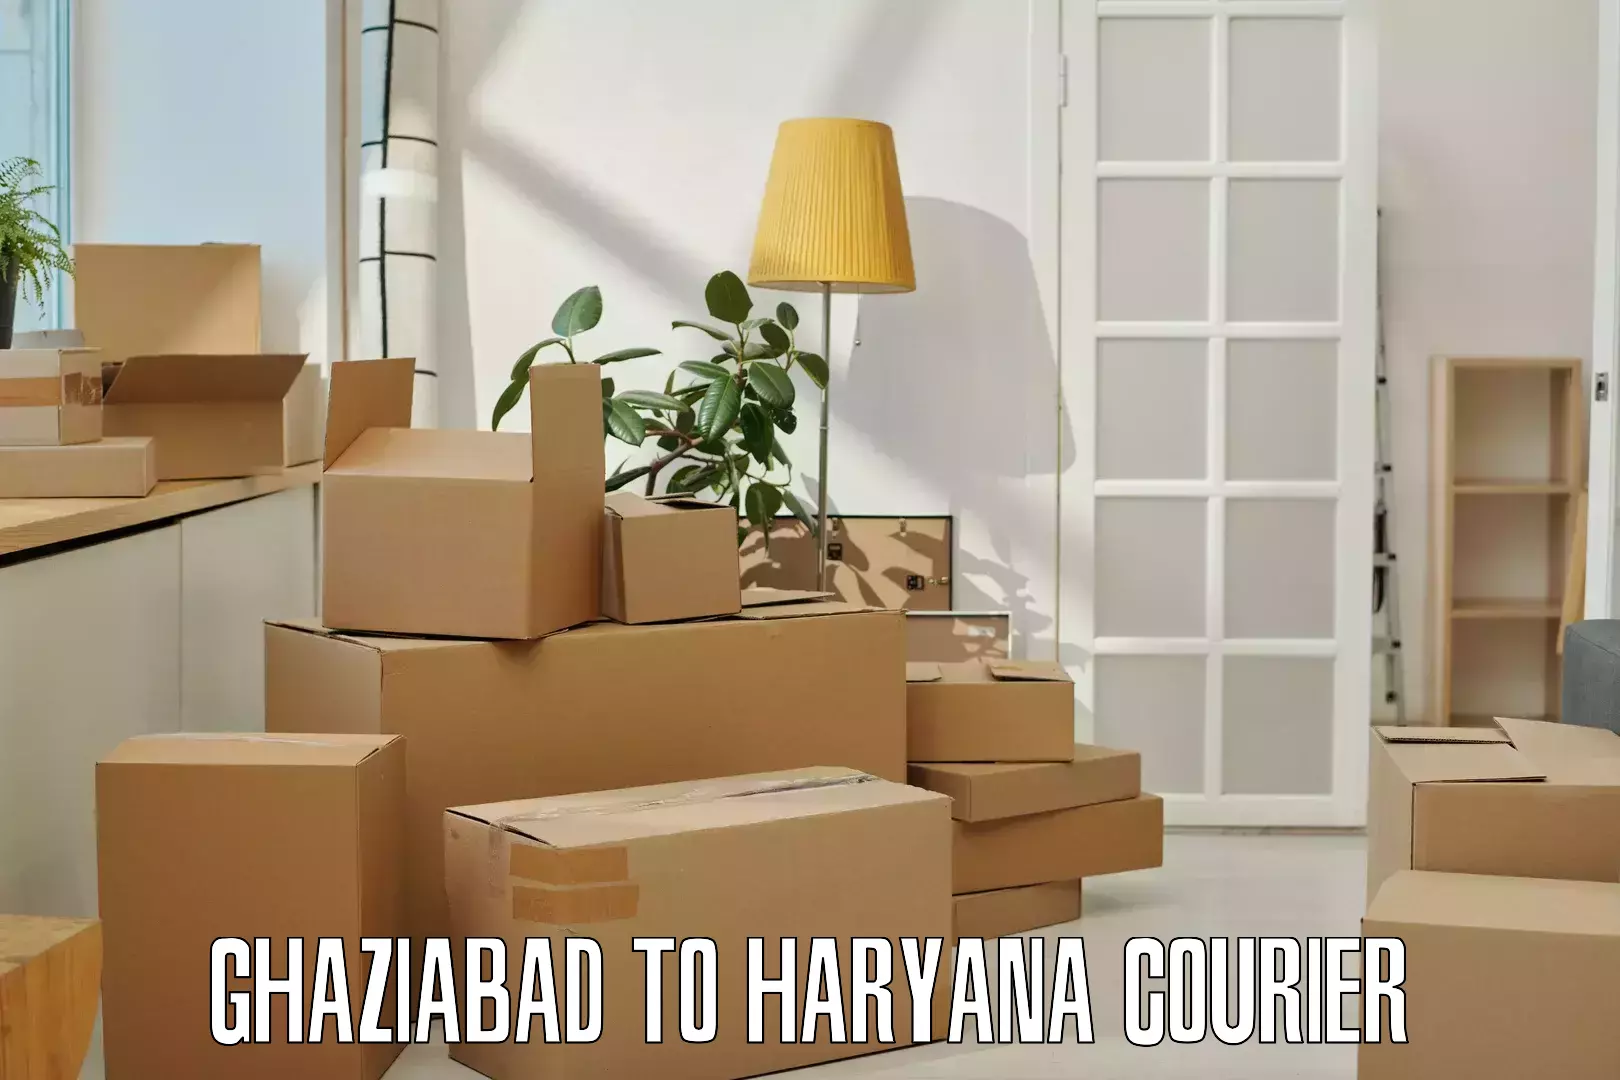 Reliable courier service Ghaziabad to Faridabad